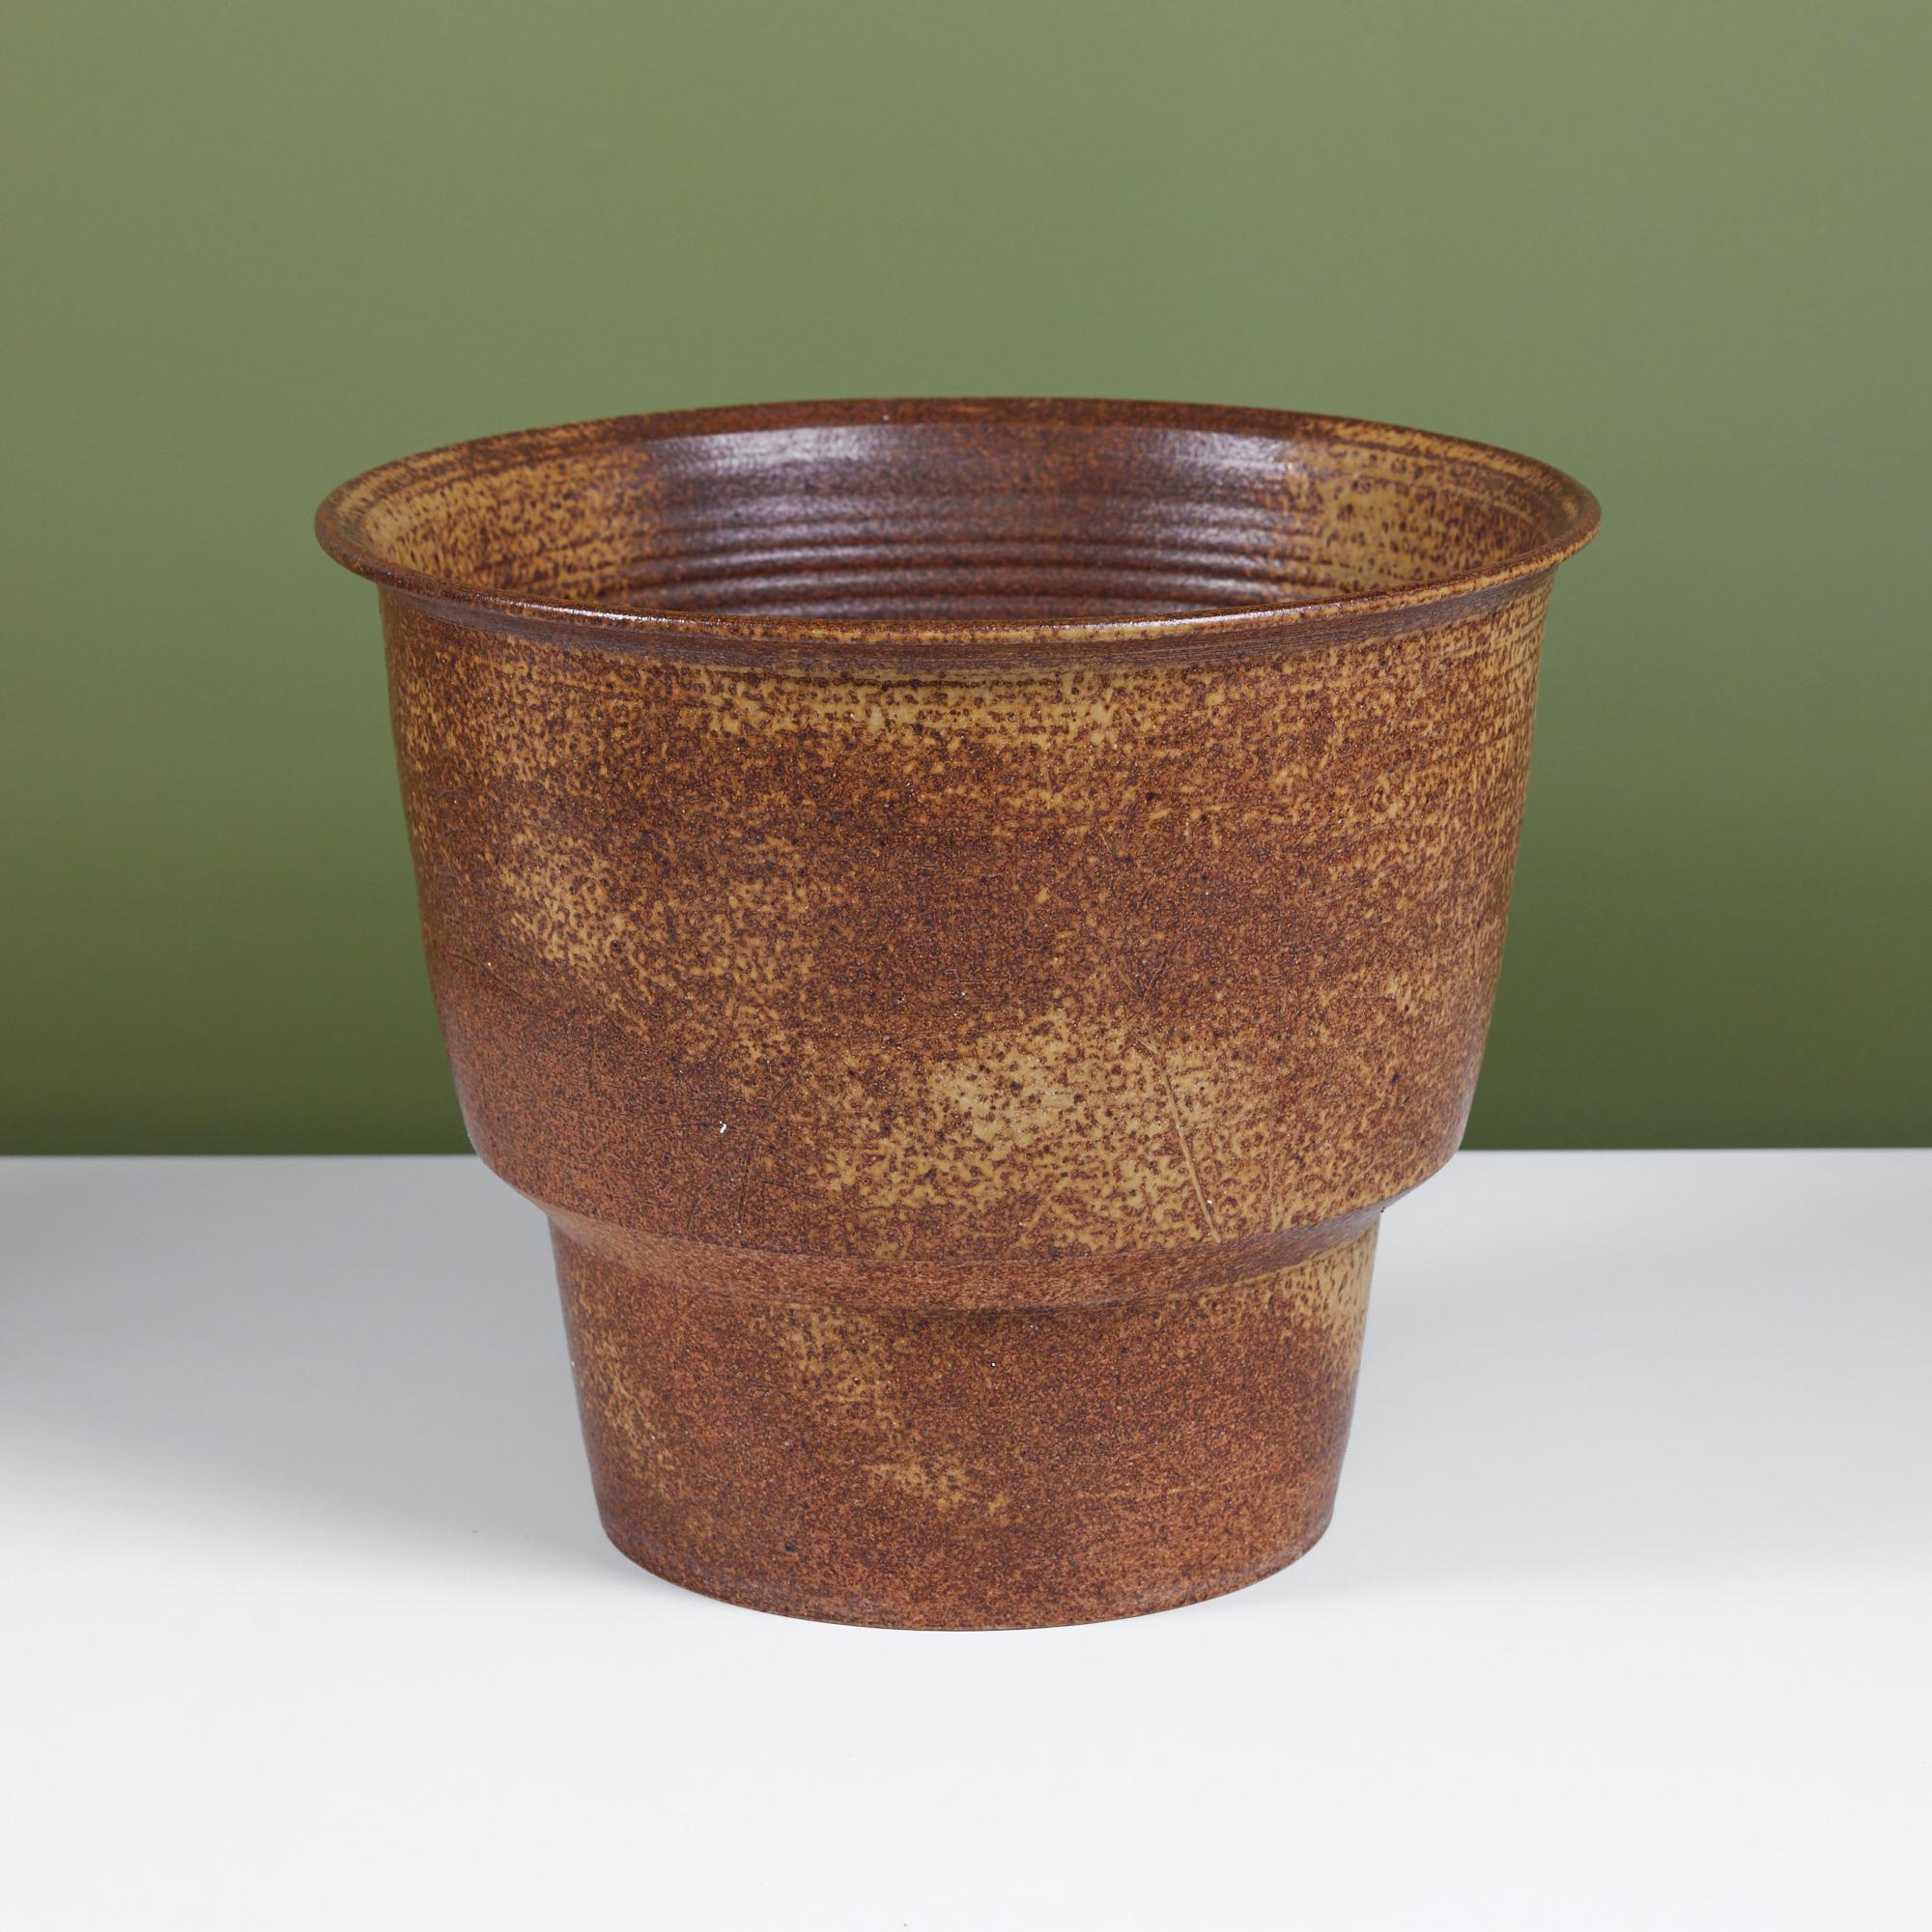 Hand thrown stoneware planter. This planter features a golden brown and yellow speckle glaze both on the exterior and interior. The planter tapers towards the bottom and has a flat lip around the top.
Signed.

Dimensions
14